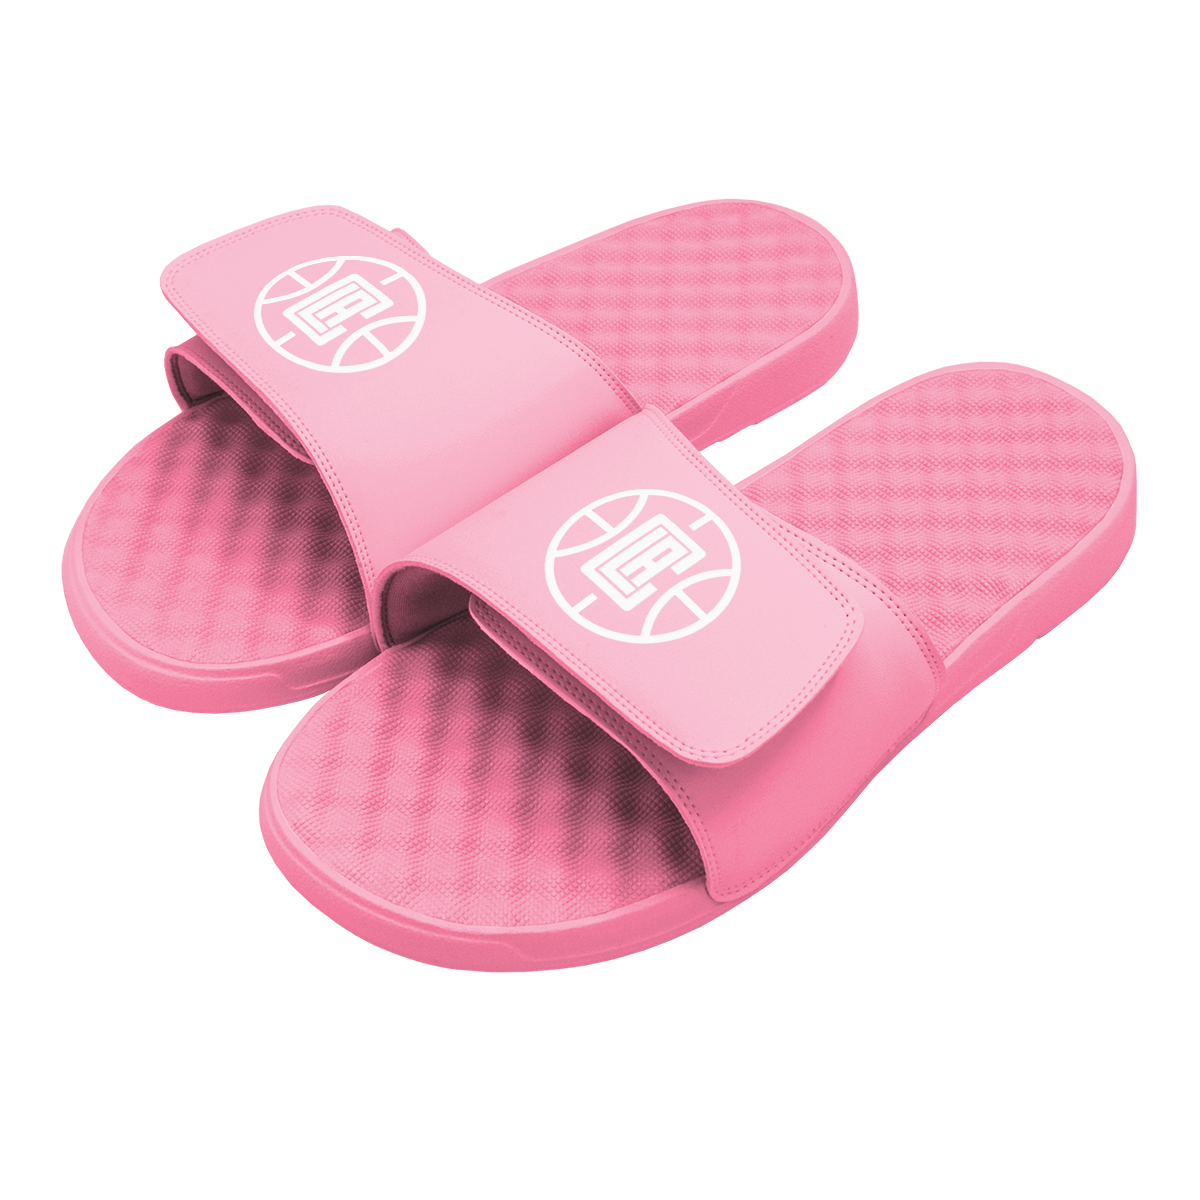 Los Angeles Clippers Primary Pink Slides